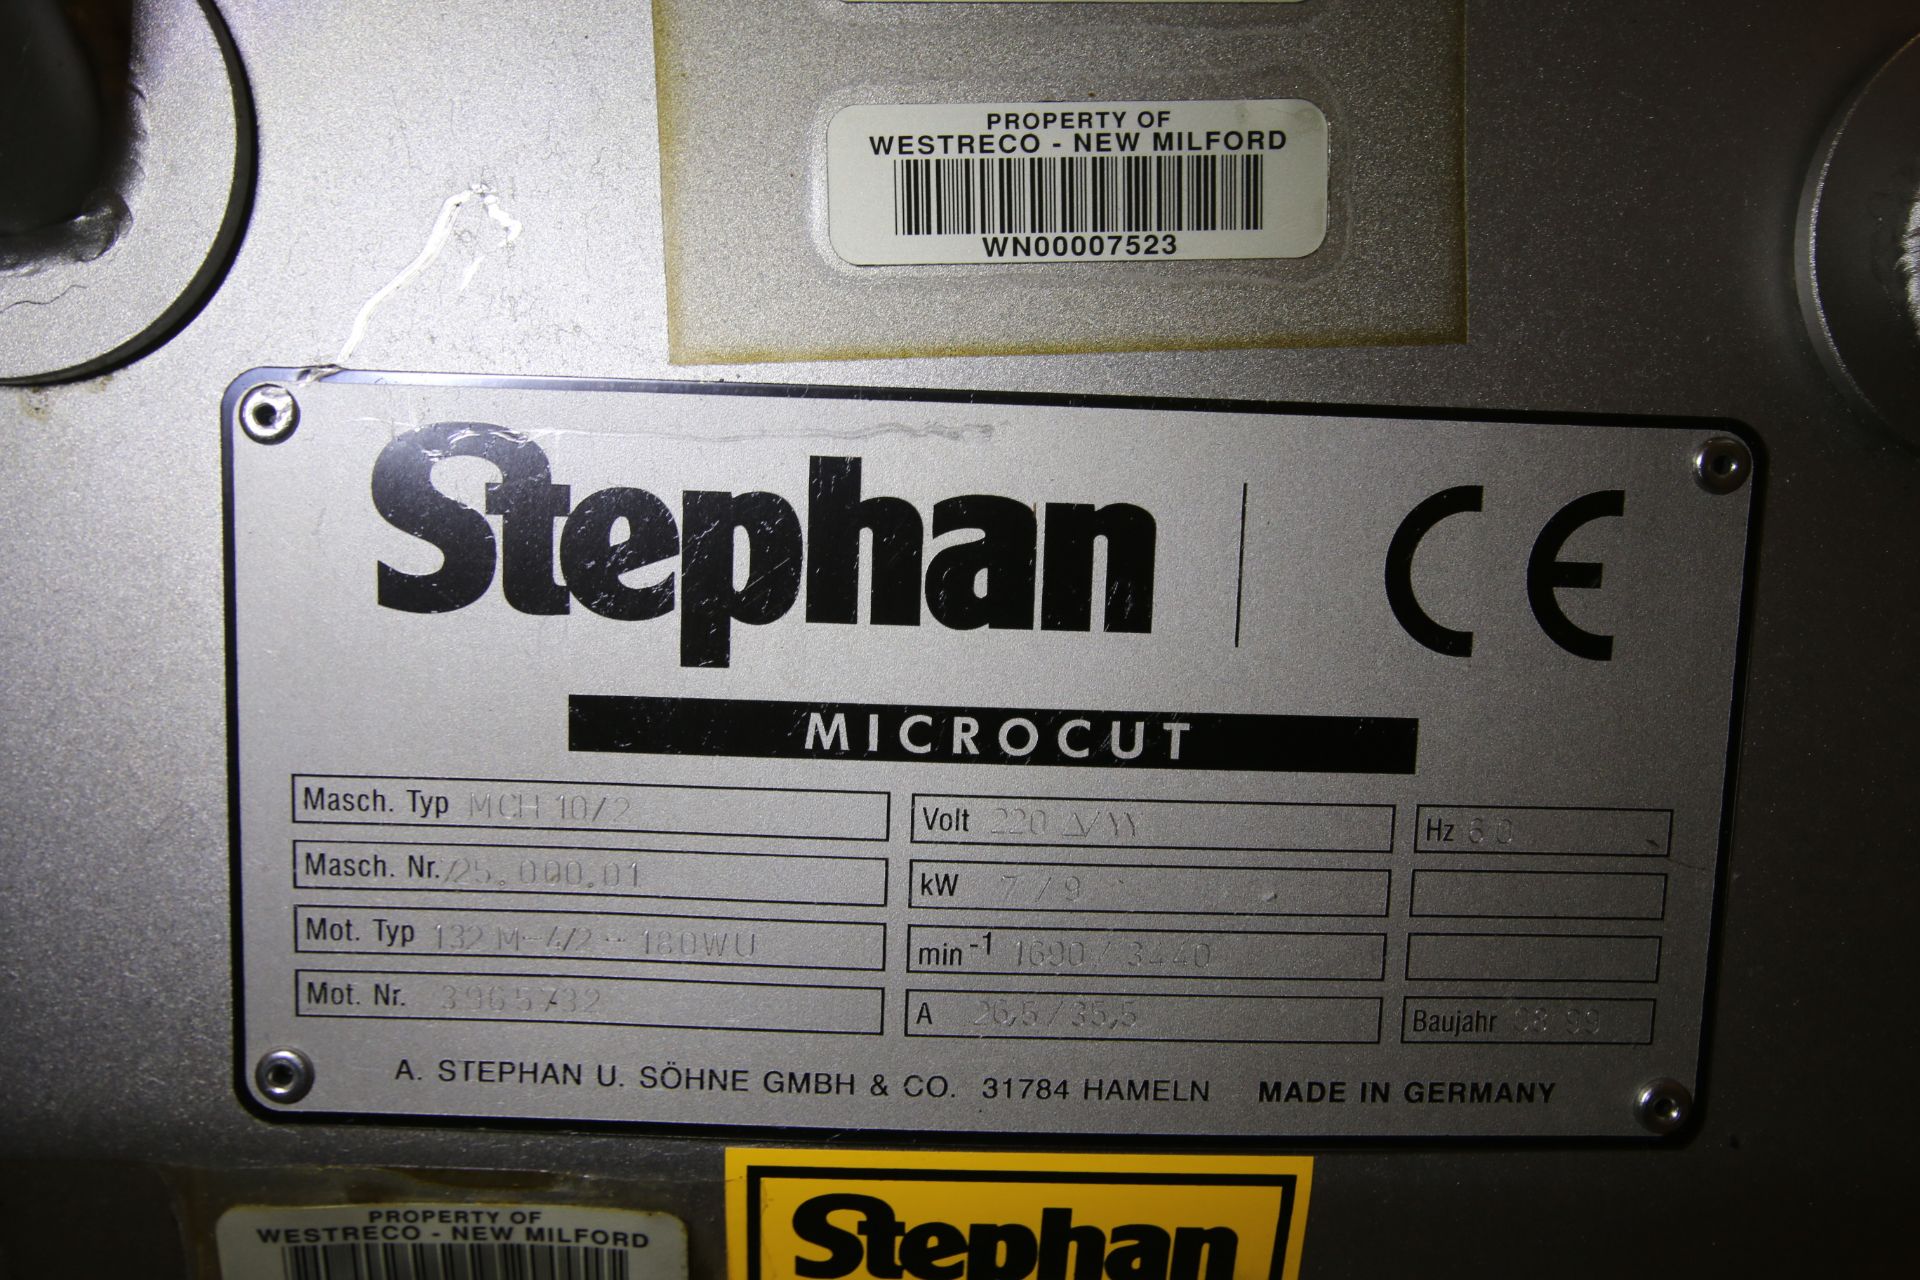 Stephan S/S Microcut, Mach. Type MCH 10/2, Mach. No. 725.000.01, 220V, with 2" Threaded Head - Image 7 of 7